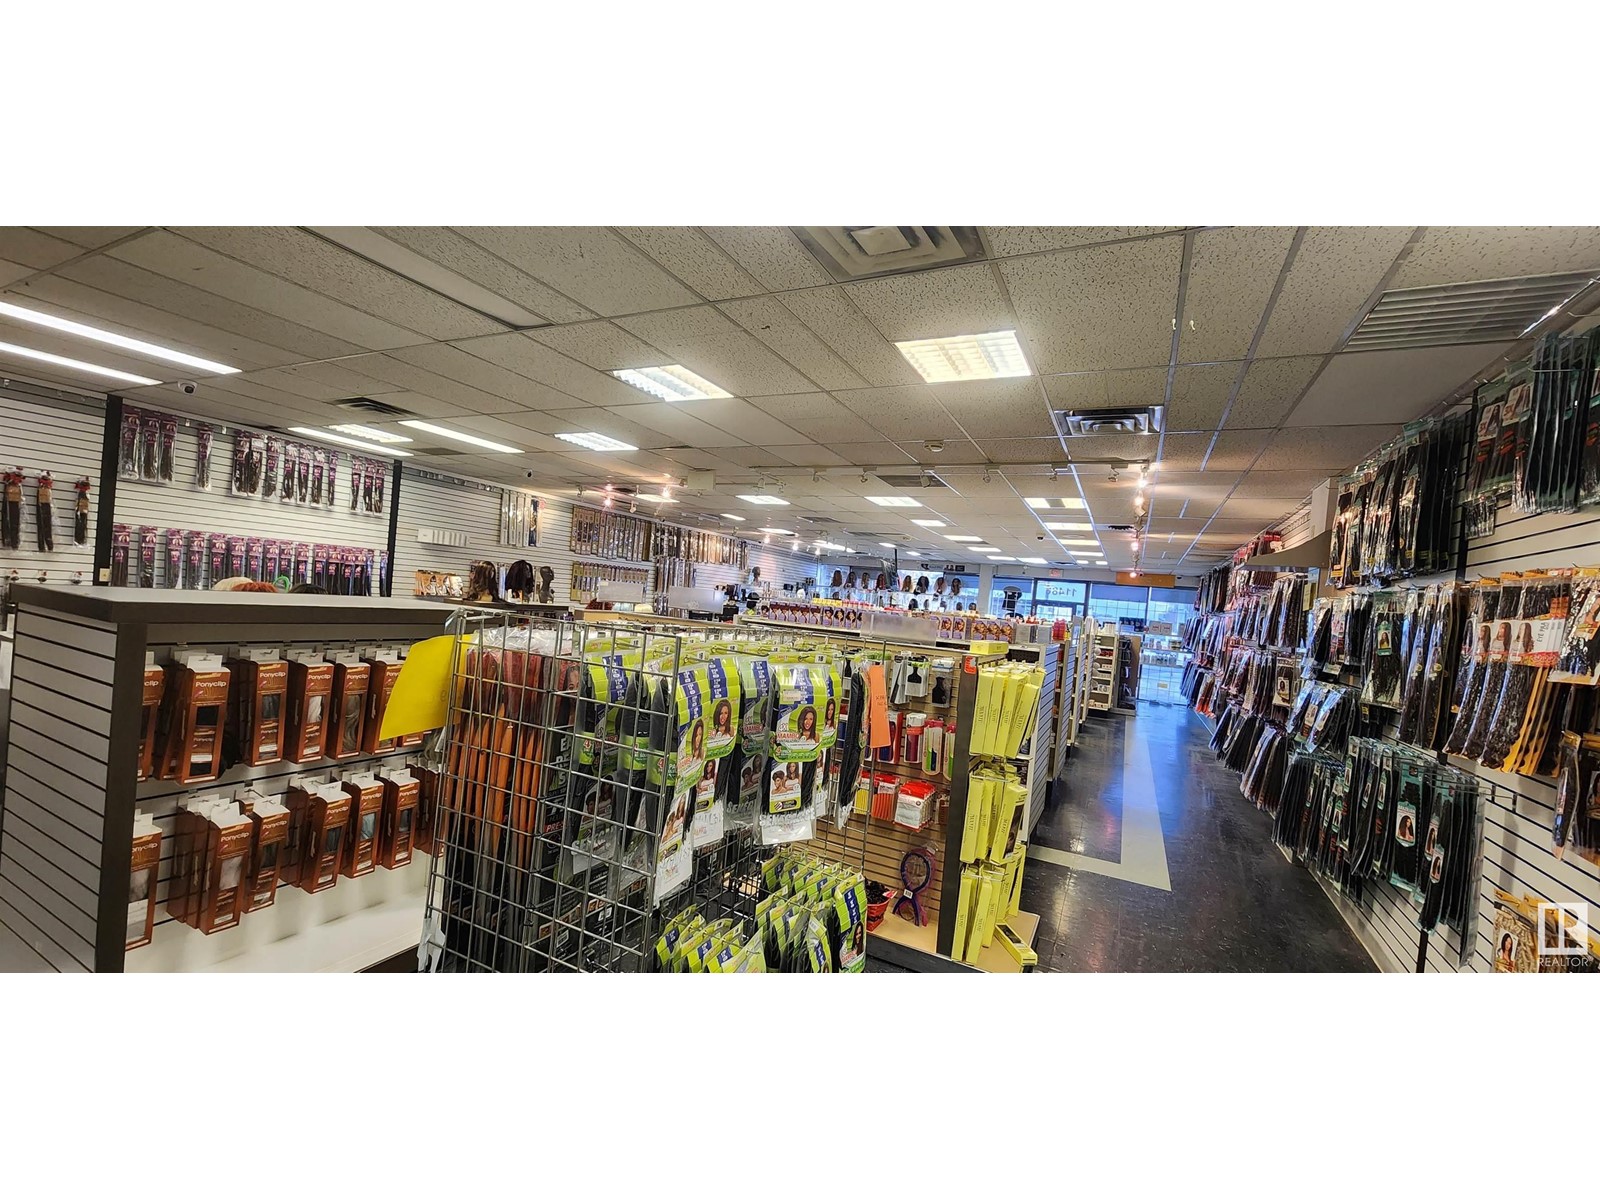 New store sells specialty fishing tackle